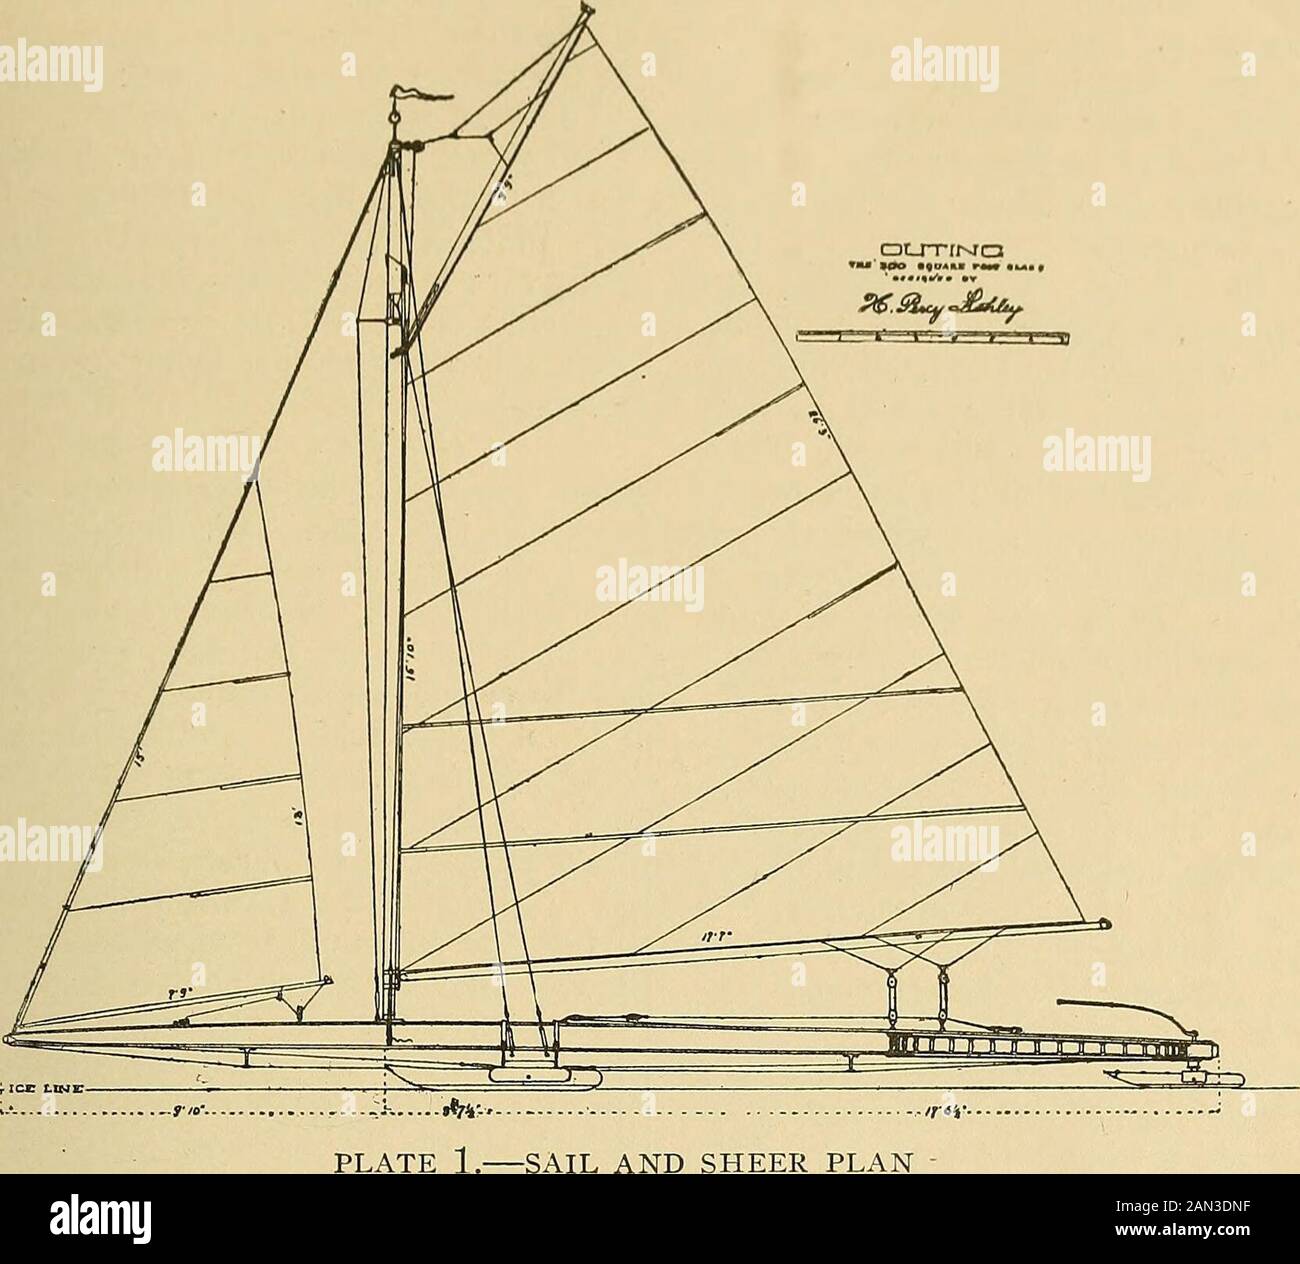 Outing . hemain-sheet. Halyard jigs are used to tune up thewire halyards and are of hemp rope, asis also the jig for the main sheet. Wewill now take up the specifications forconstruction. Equipment and tuning upwill be treated afterward. General dimensions of hull: Back-bone, 31 feet over all; center, 8^2 incheshigh,6^ broad at center; nose,4^x4^4 ;heel, 5 inches high, 5 inches broad;center of the mast placed 9 feet 10inches aft of extreme forward part; dis-tance of center of mast to center of run-ner plank at point it crosses backbone,3 feet 7^2 inches; center of runnerplank to forward end of Stock Photo